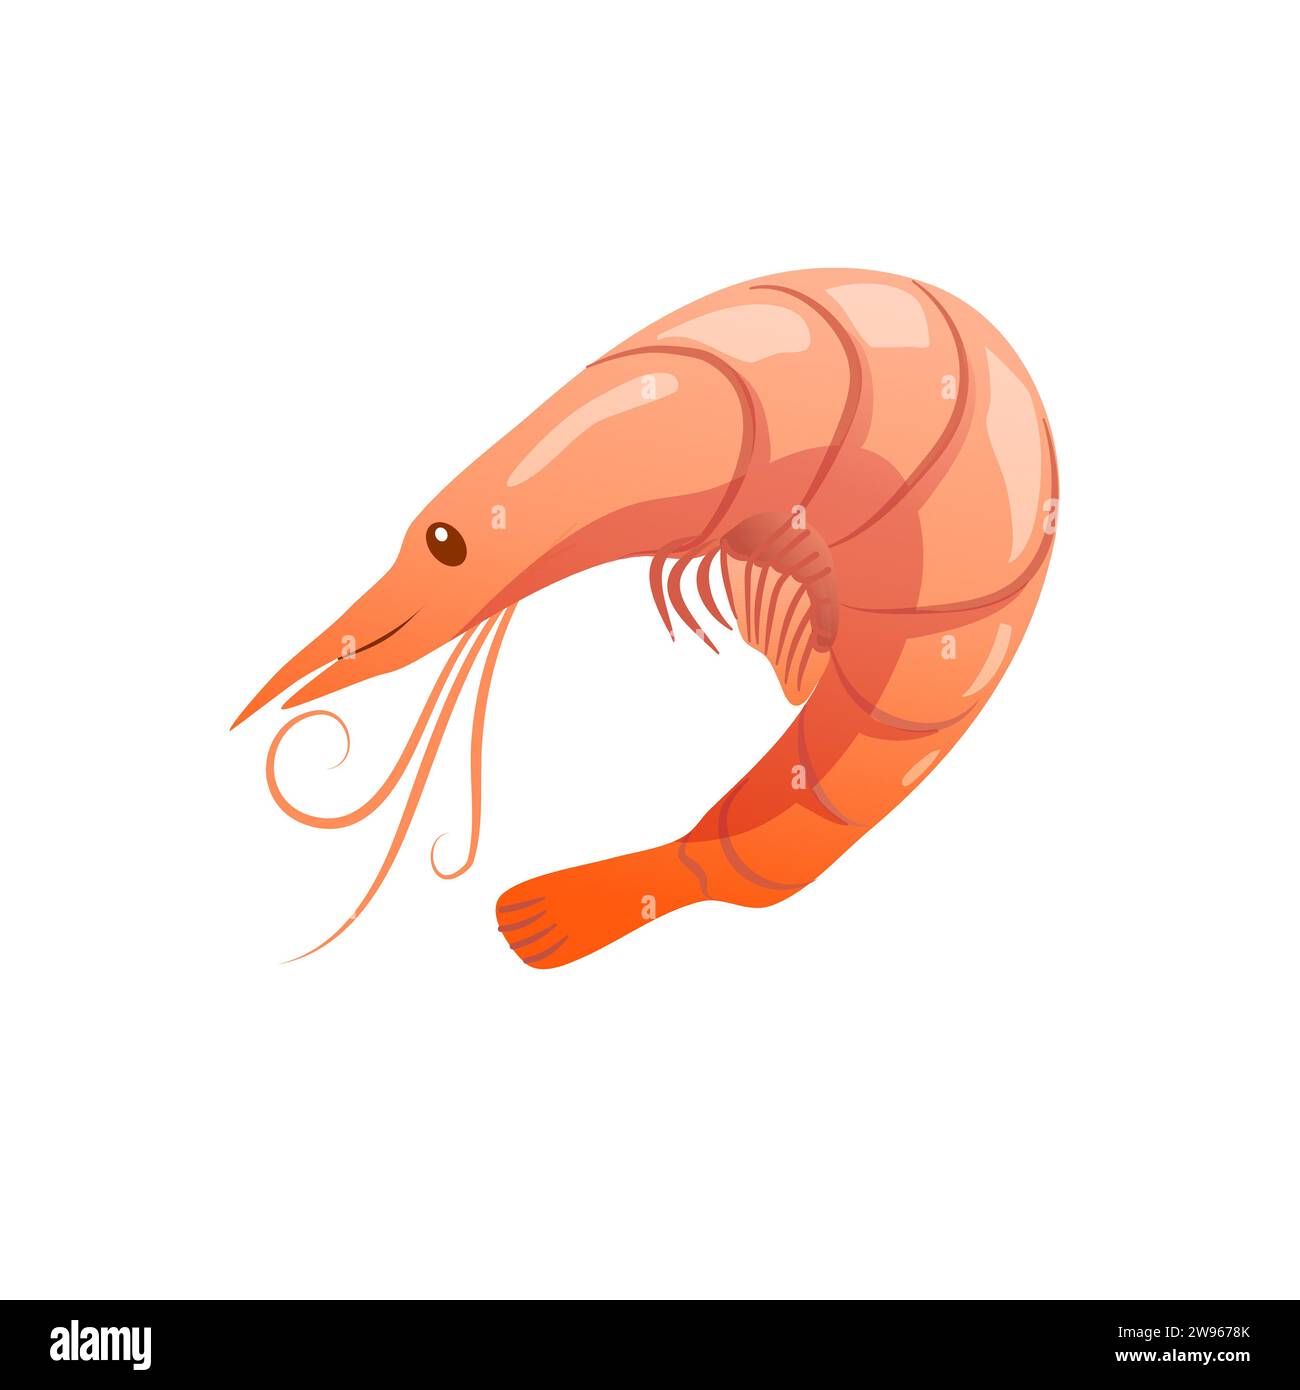 Shrimp icon in flat style, seafood. Isolated on white background. Stock Vector